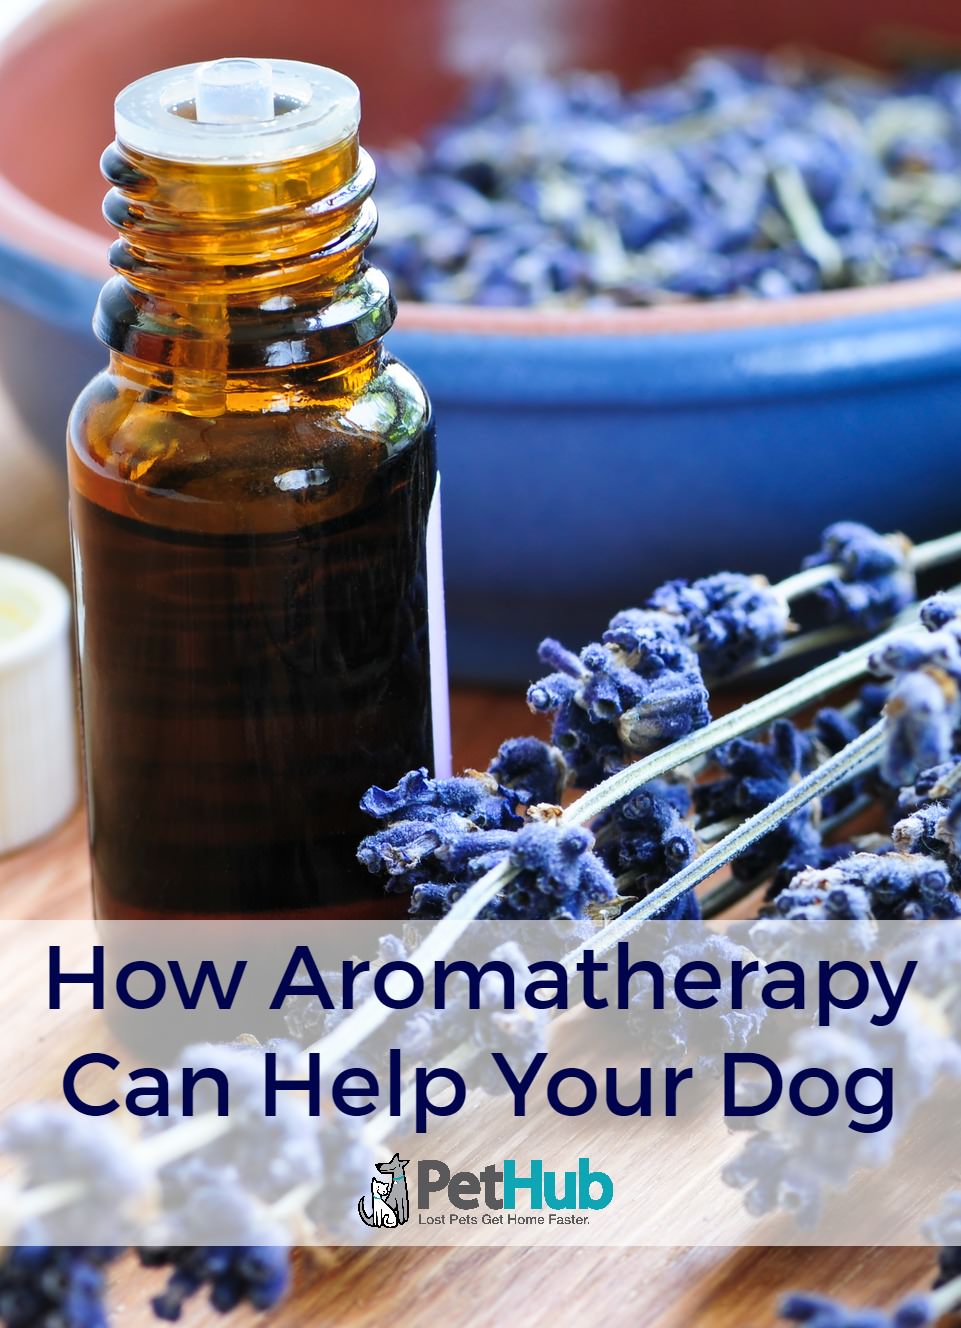 Image of essential oil with text 'How Aromatherapy Can Help Your Dog'